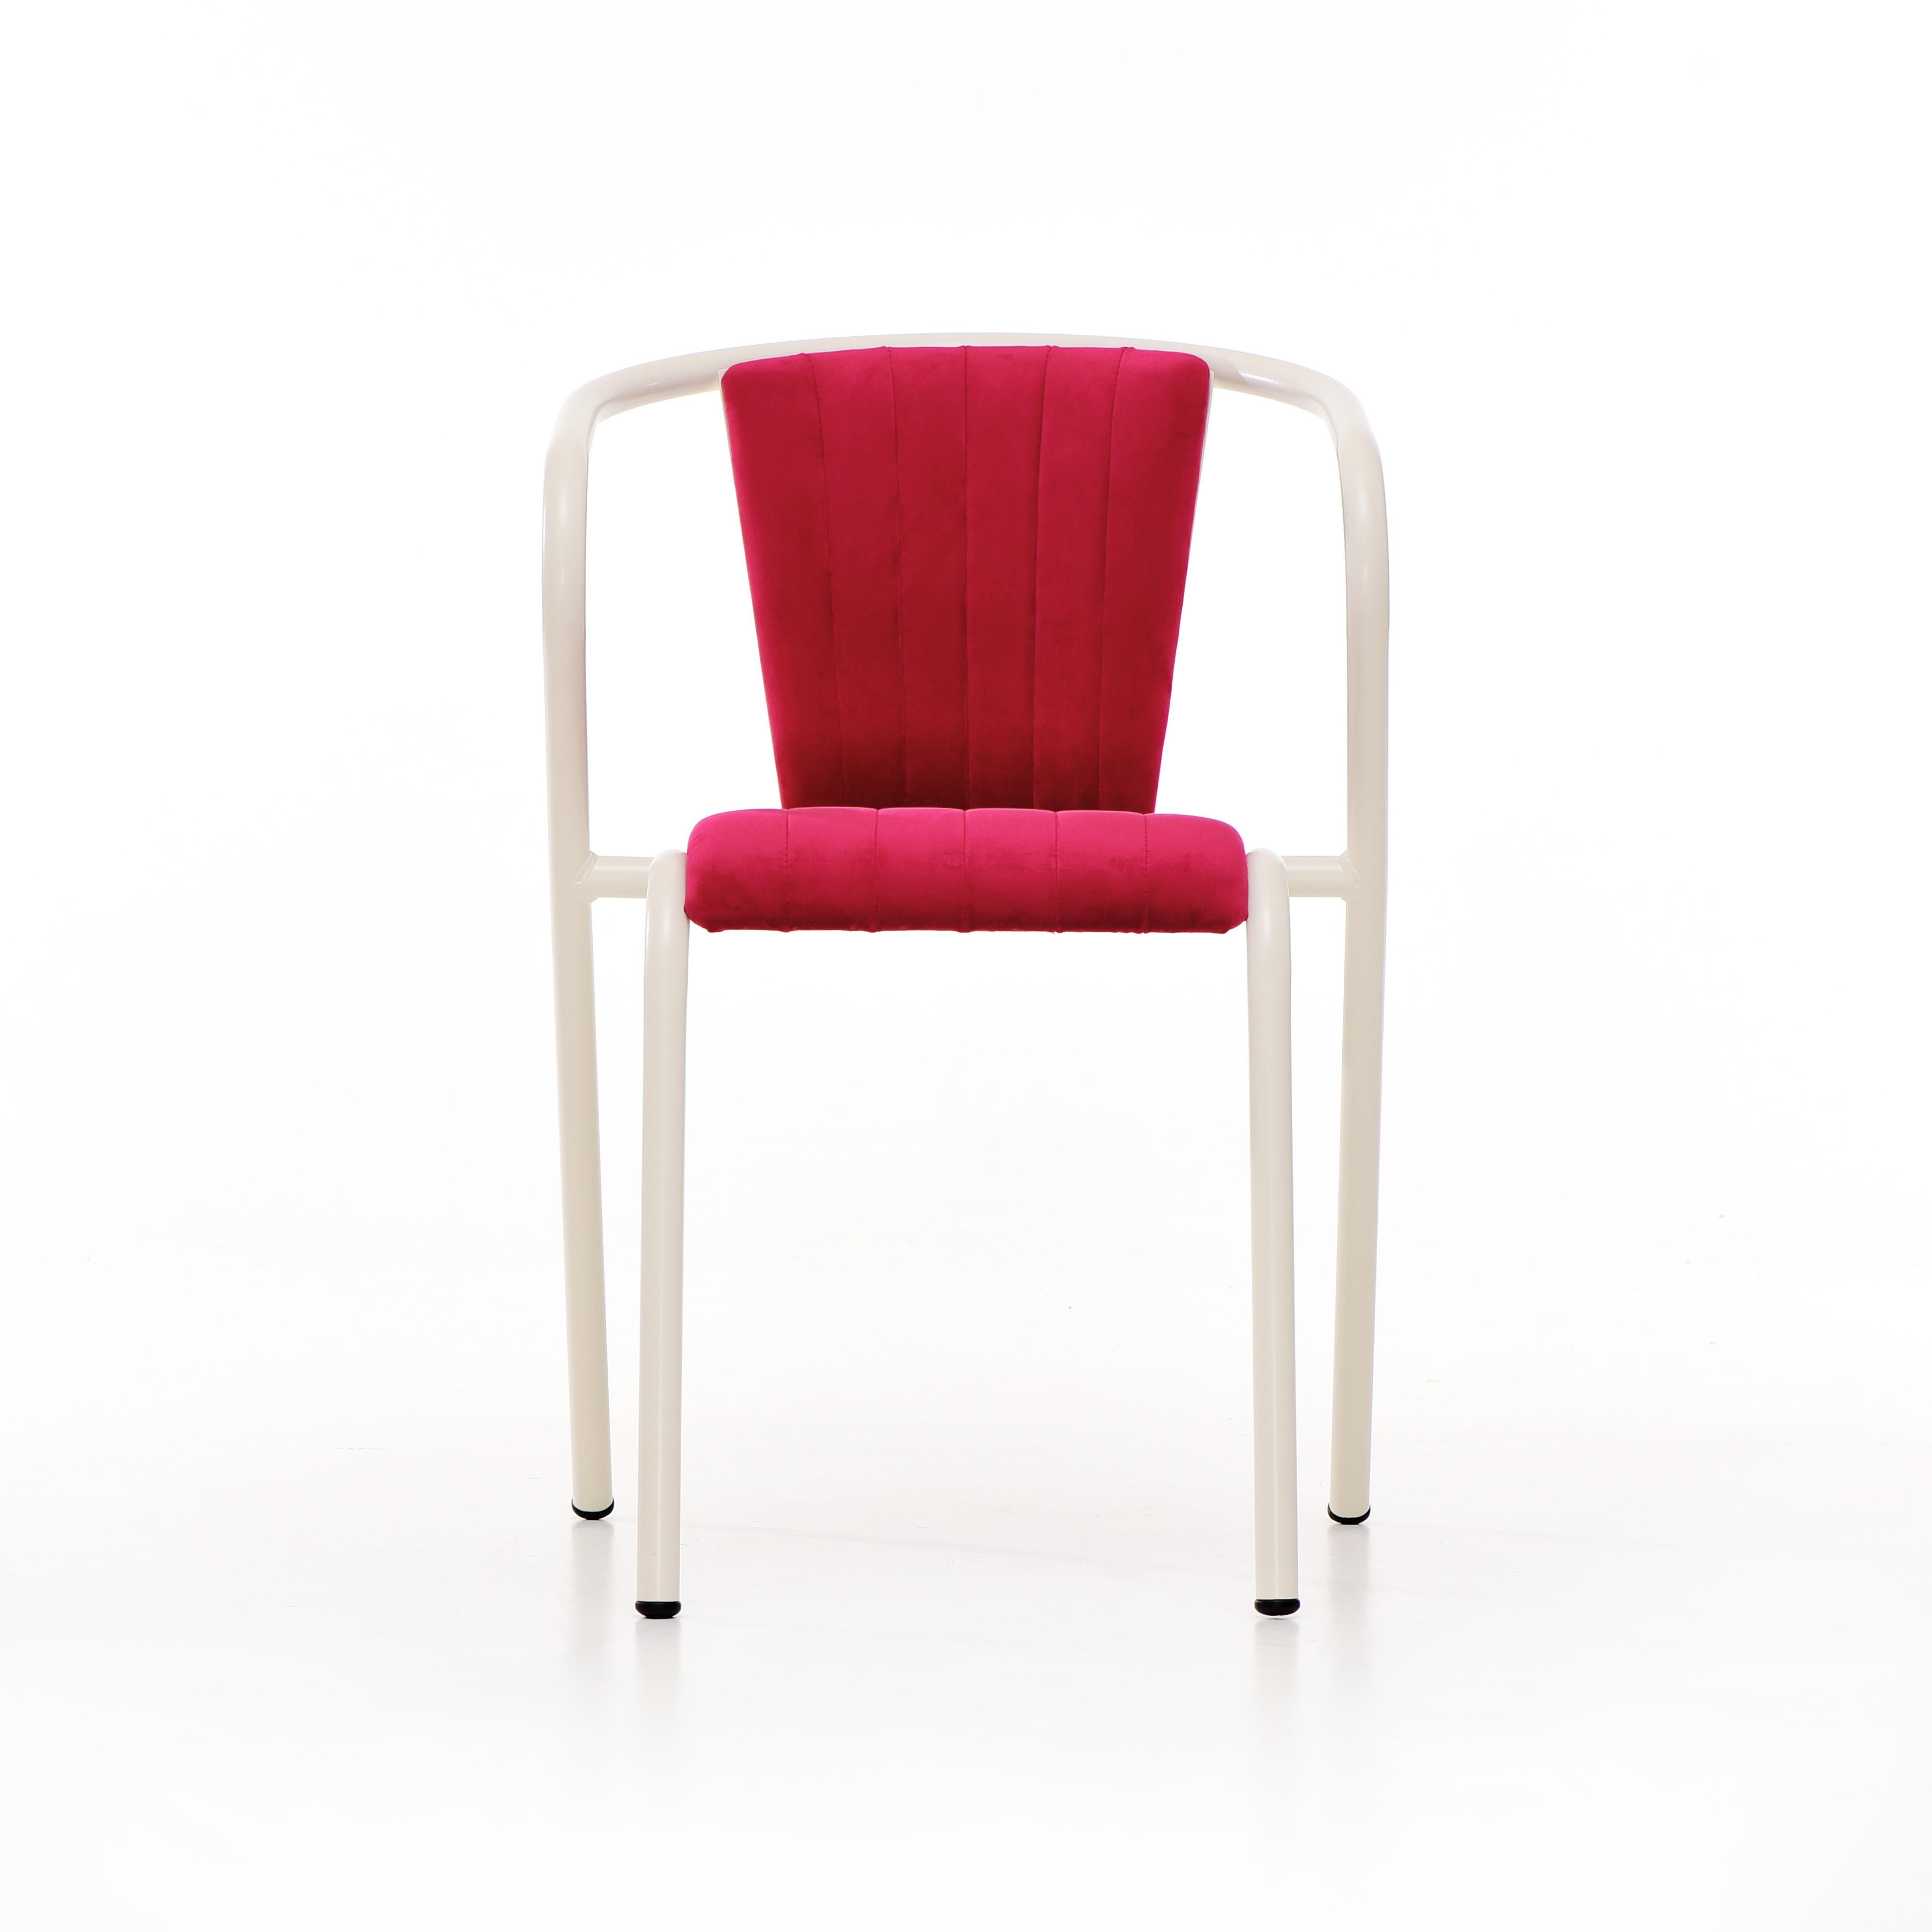 BICAchair is a stackable steel dining armchair made from recycled and recyclable steel, finished with our premium selection of powder-coating colors, in this case in an off-white color, that transforms a Classic in something new and vibrant. The